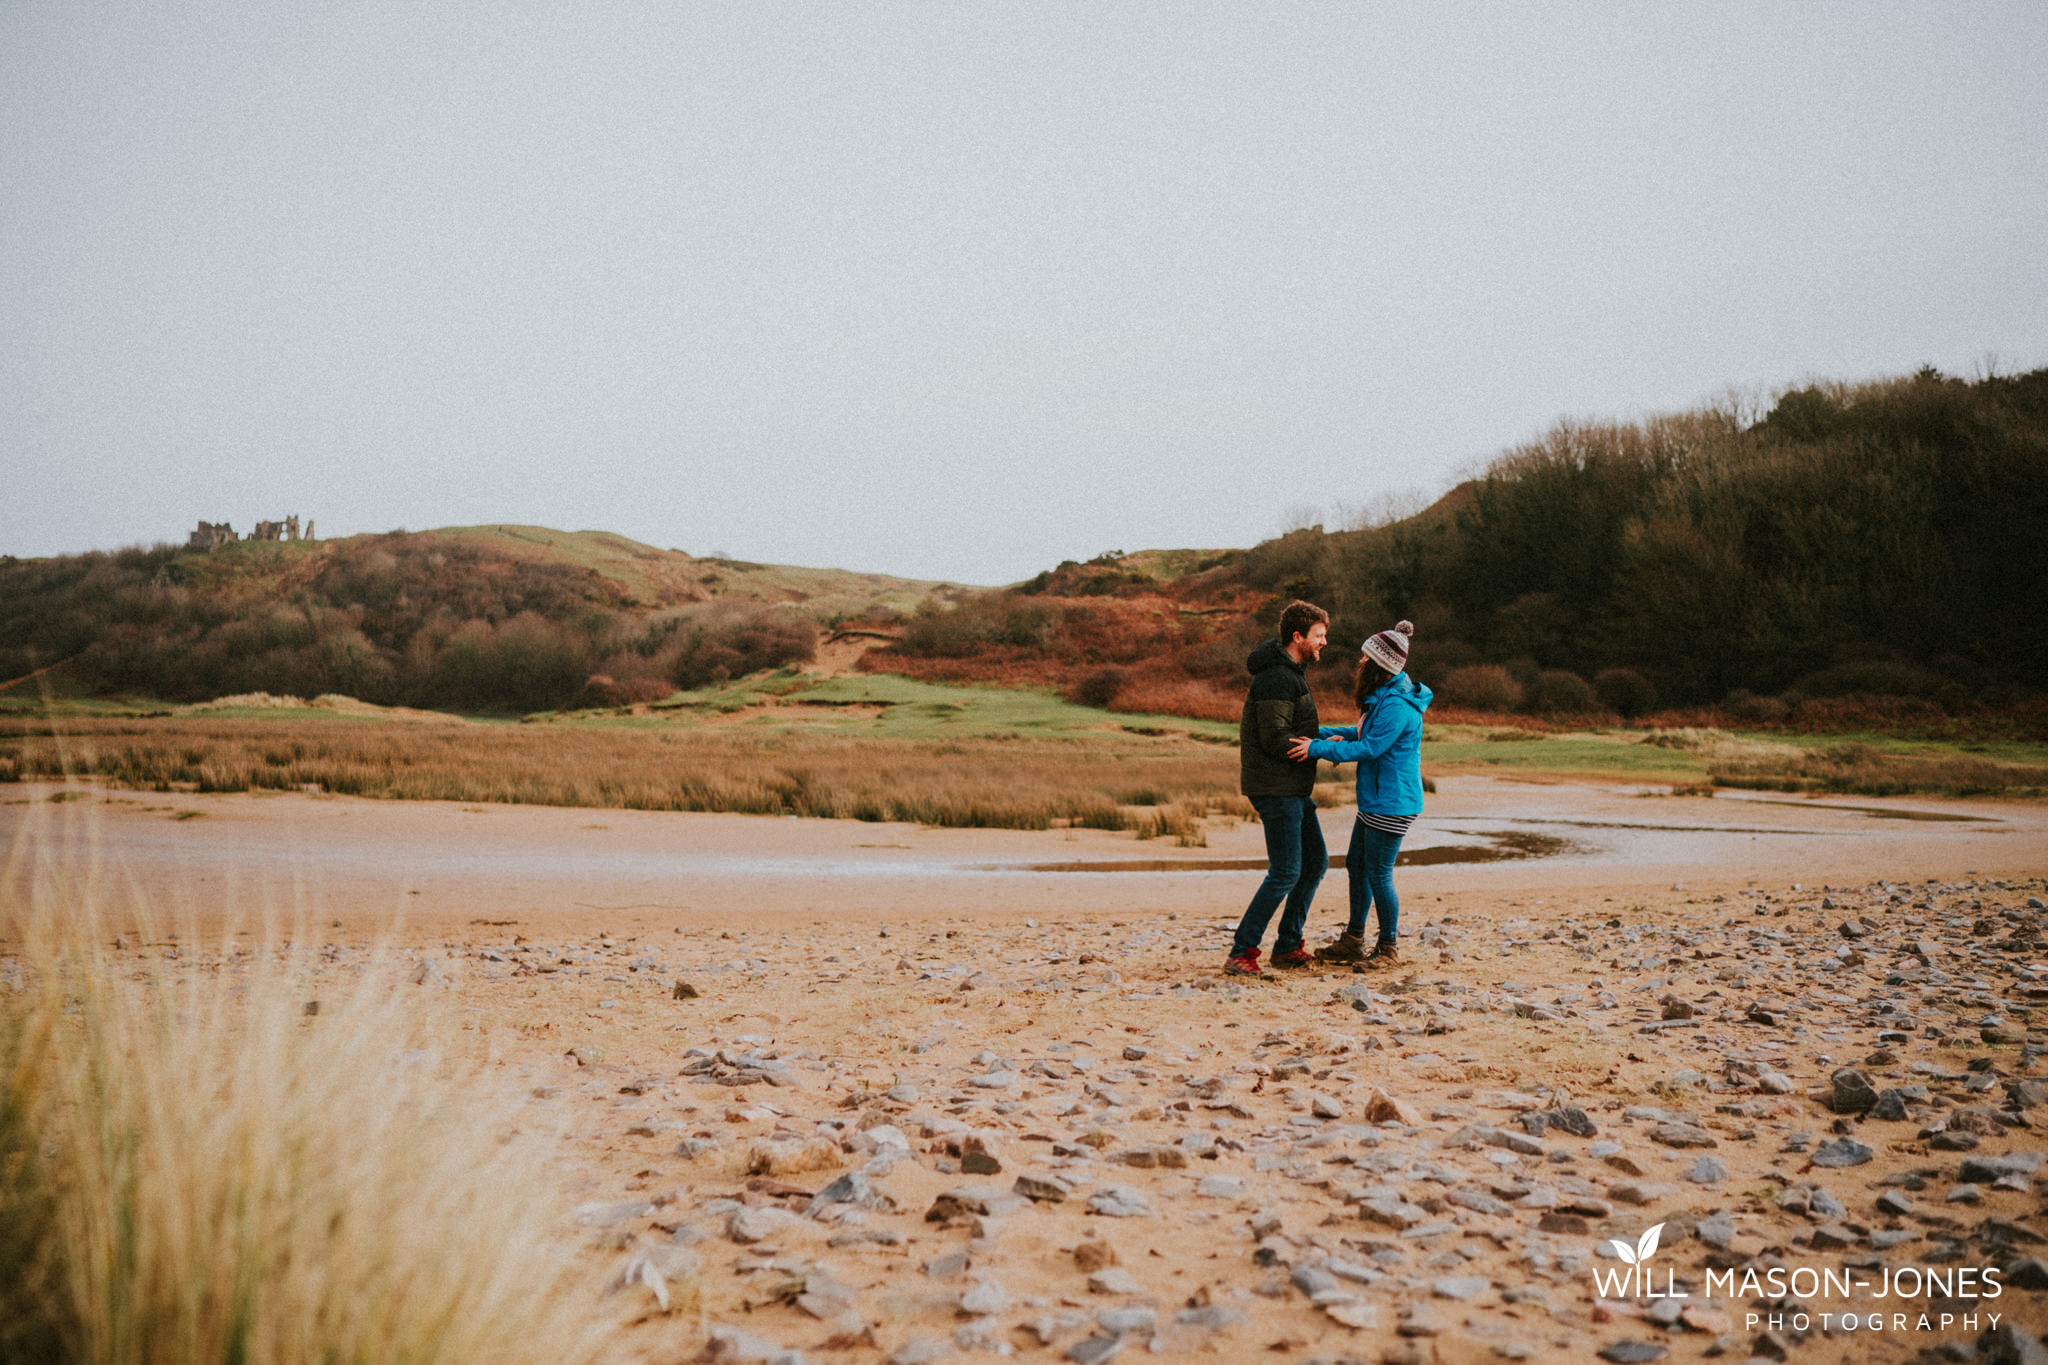  Pre wedding engagement couple photography relaxed session at three cliffs bay swansea gower 